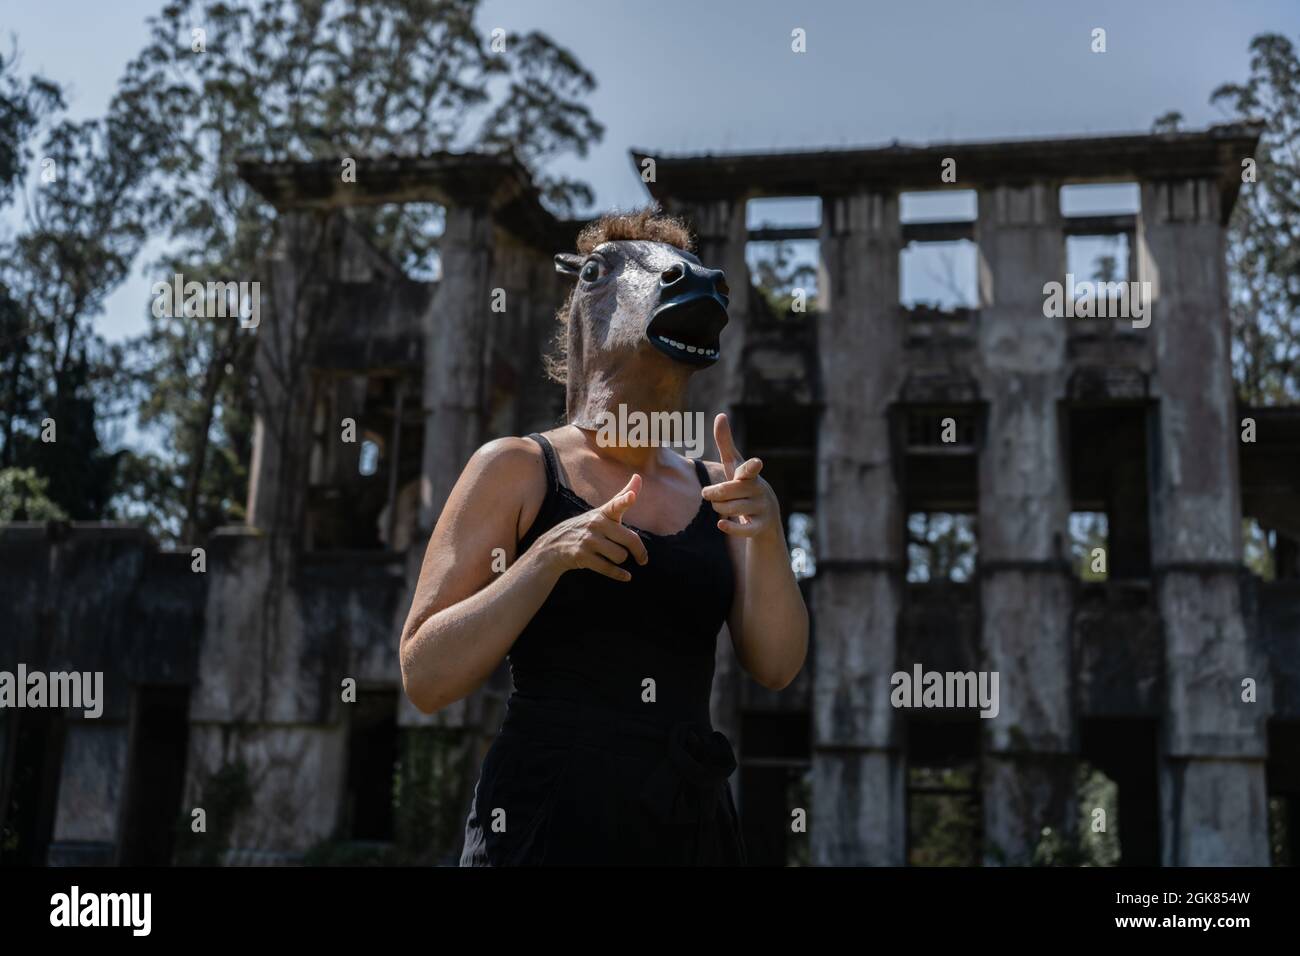 Female in horse mask pointing at camera against old ruins house Stock Photo